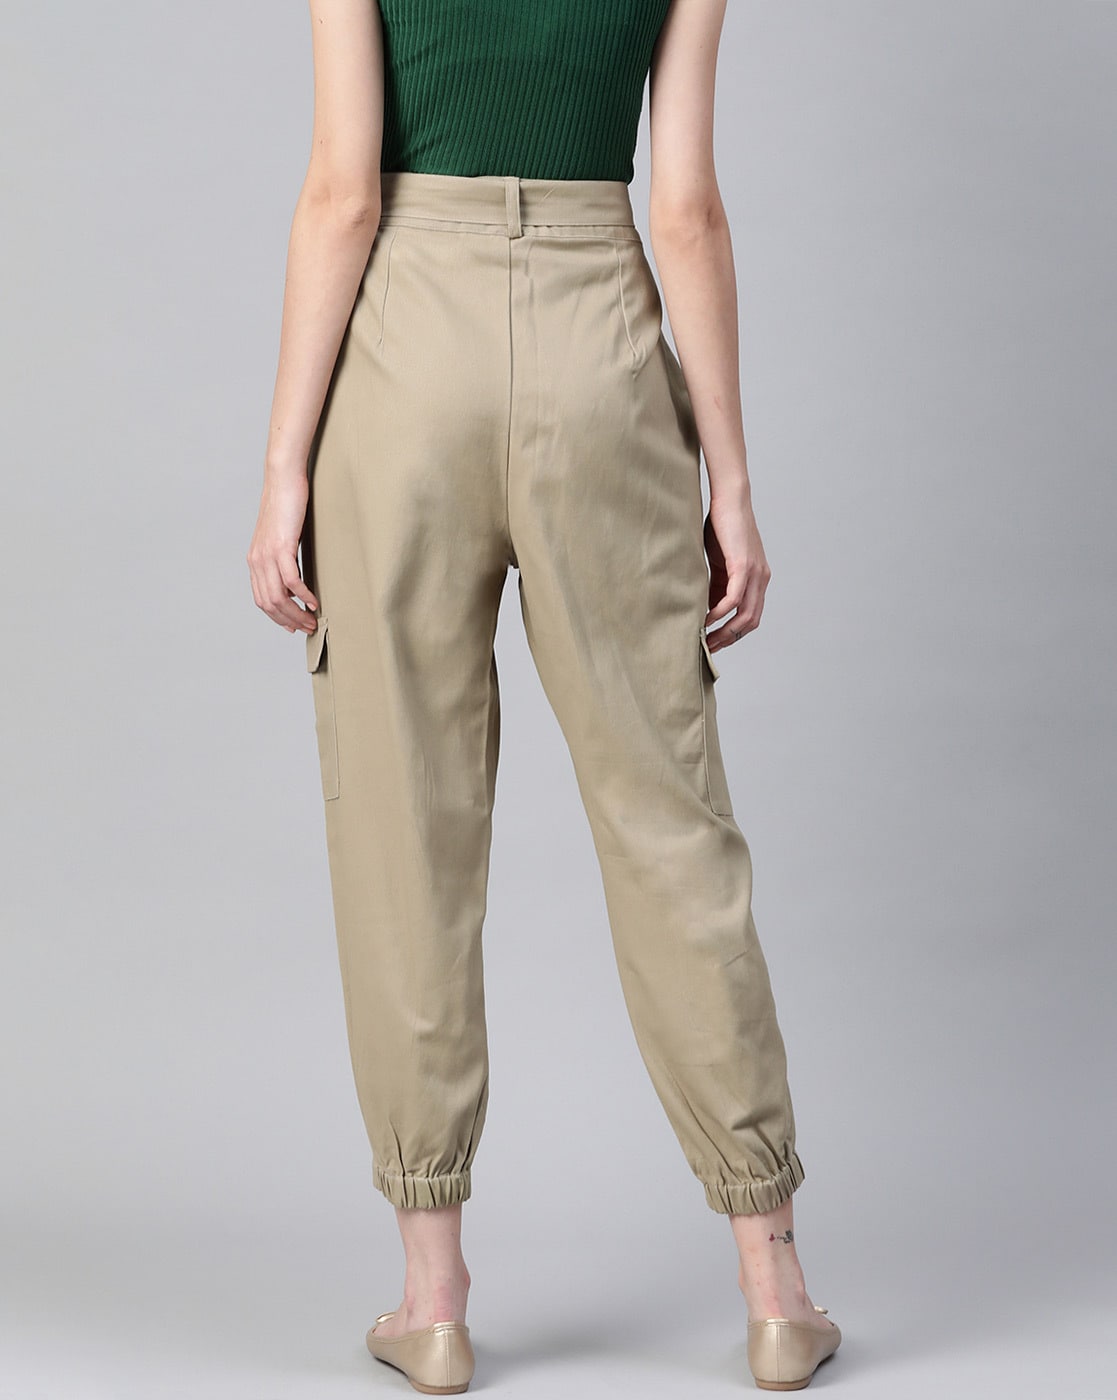 Red High Rise Paperbag Waist Pants